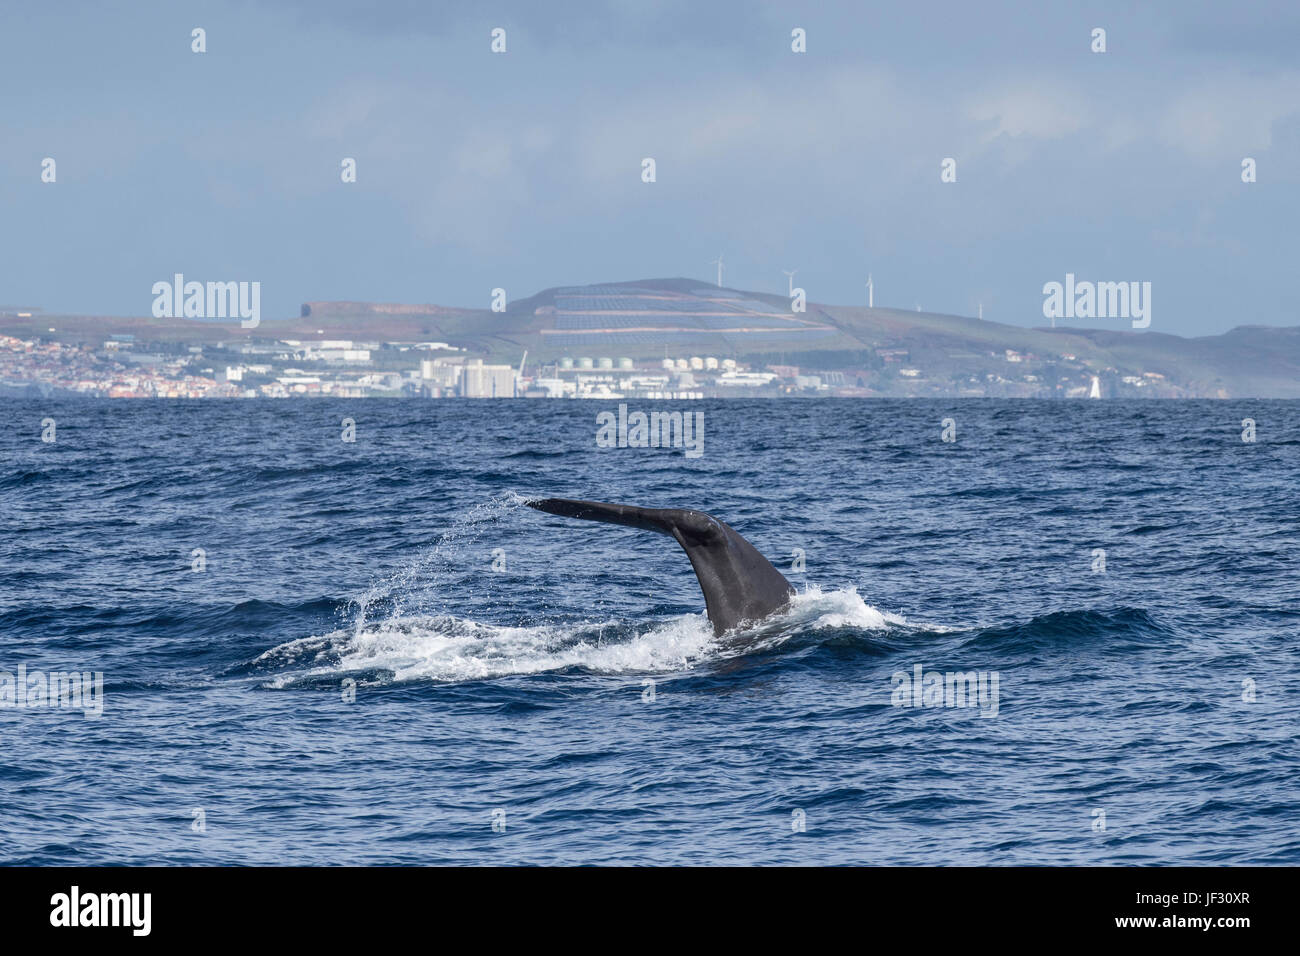 Female Sperm Whale, Physeter macrocephalus, or cachalot, fluking in front of Funchal, Madeira, North Atlantic Ocean Stock Photo